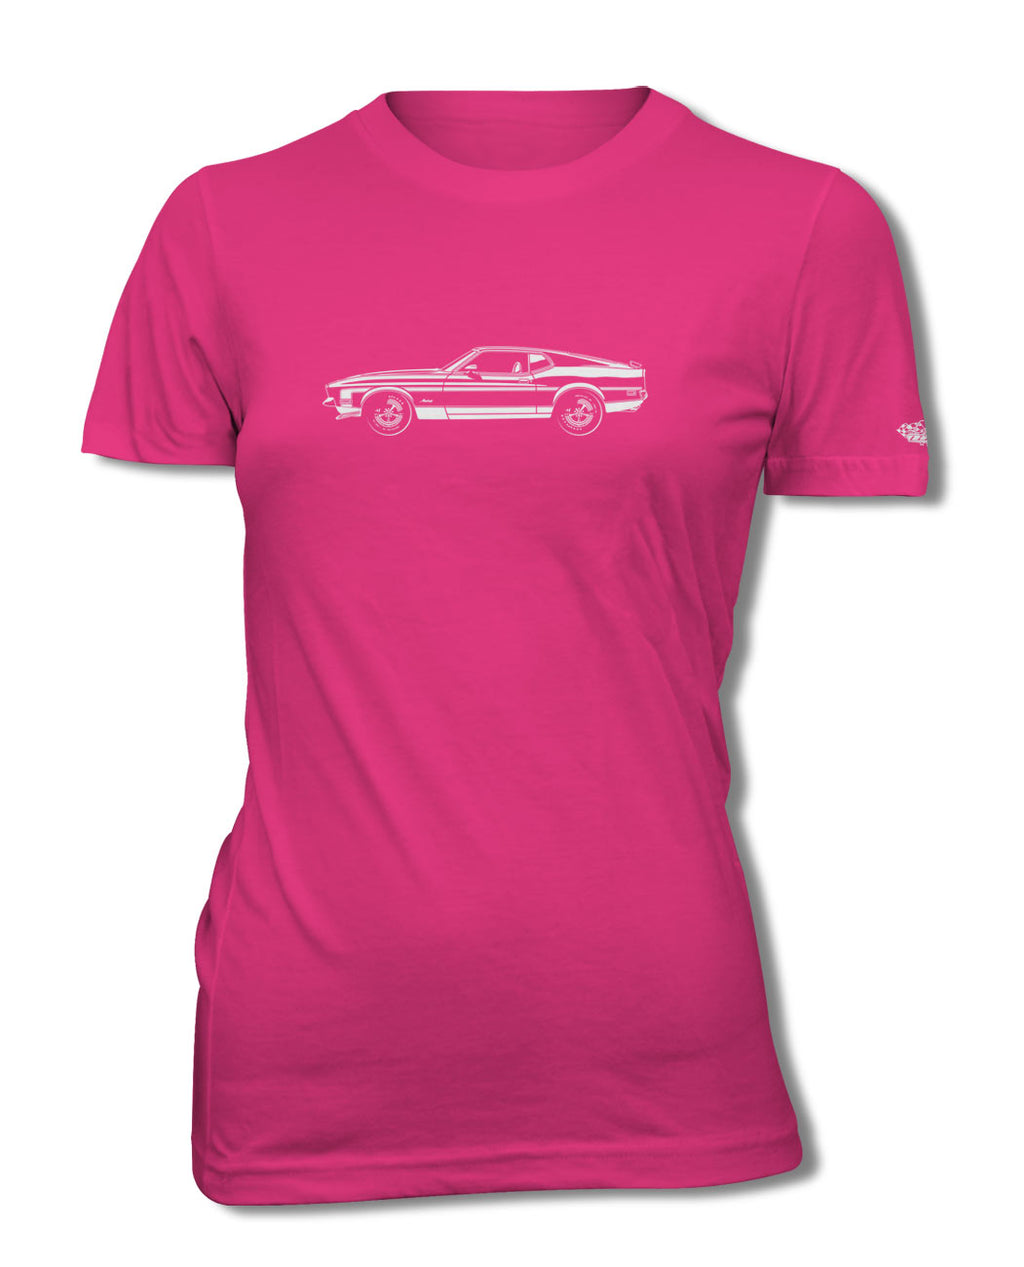 1971 Ford Mustang Sports with Stripes Sportsroof T-Shirt - Women - Side View